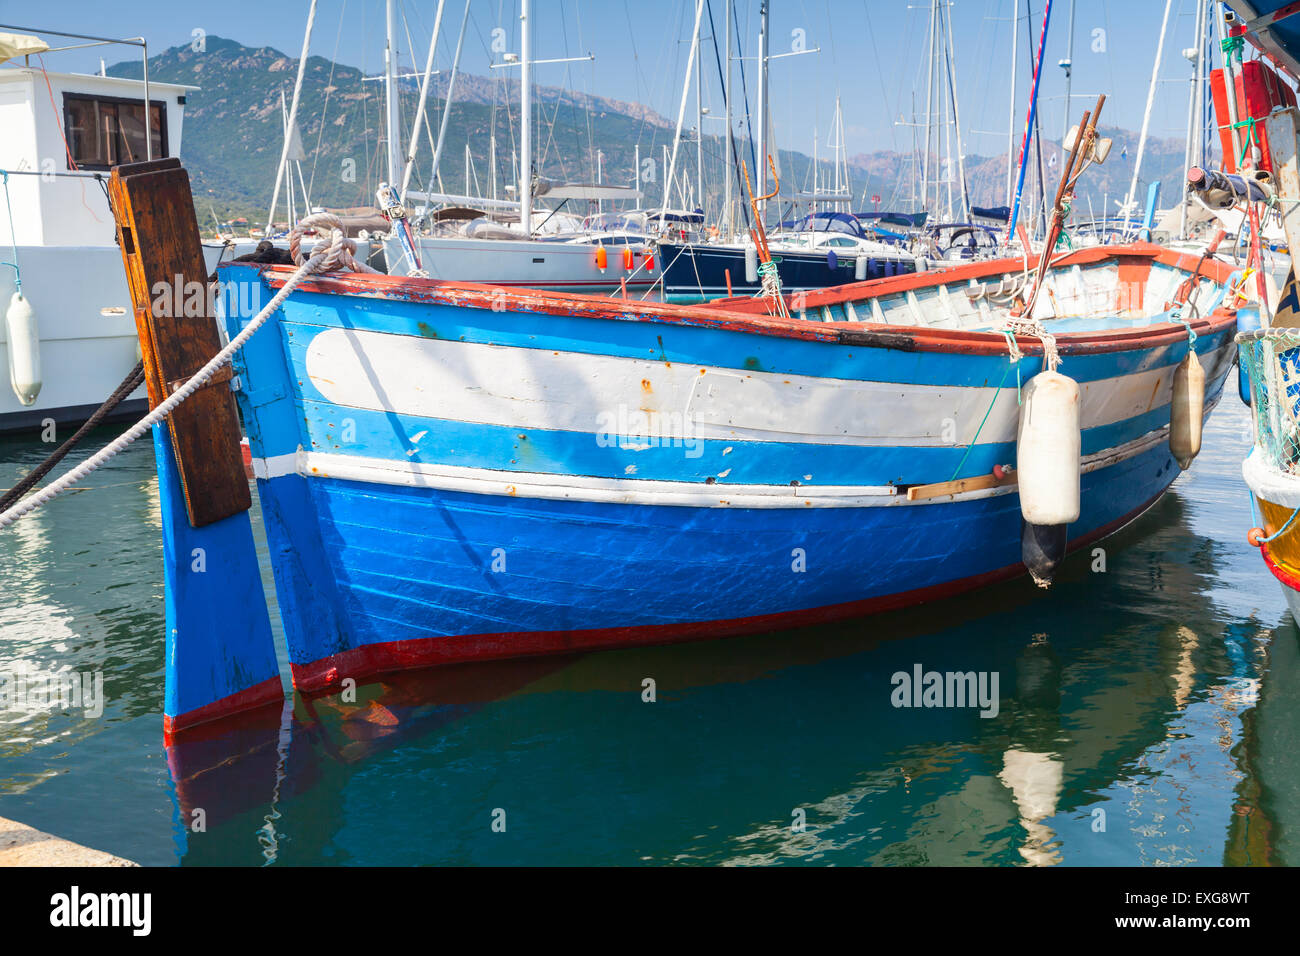 Small blue and white wooden fishing boat moored in Propriano town, Corsica, France Stock Photo